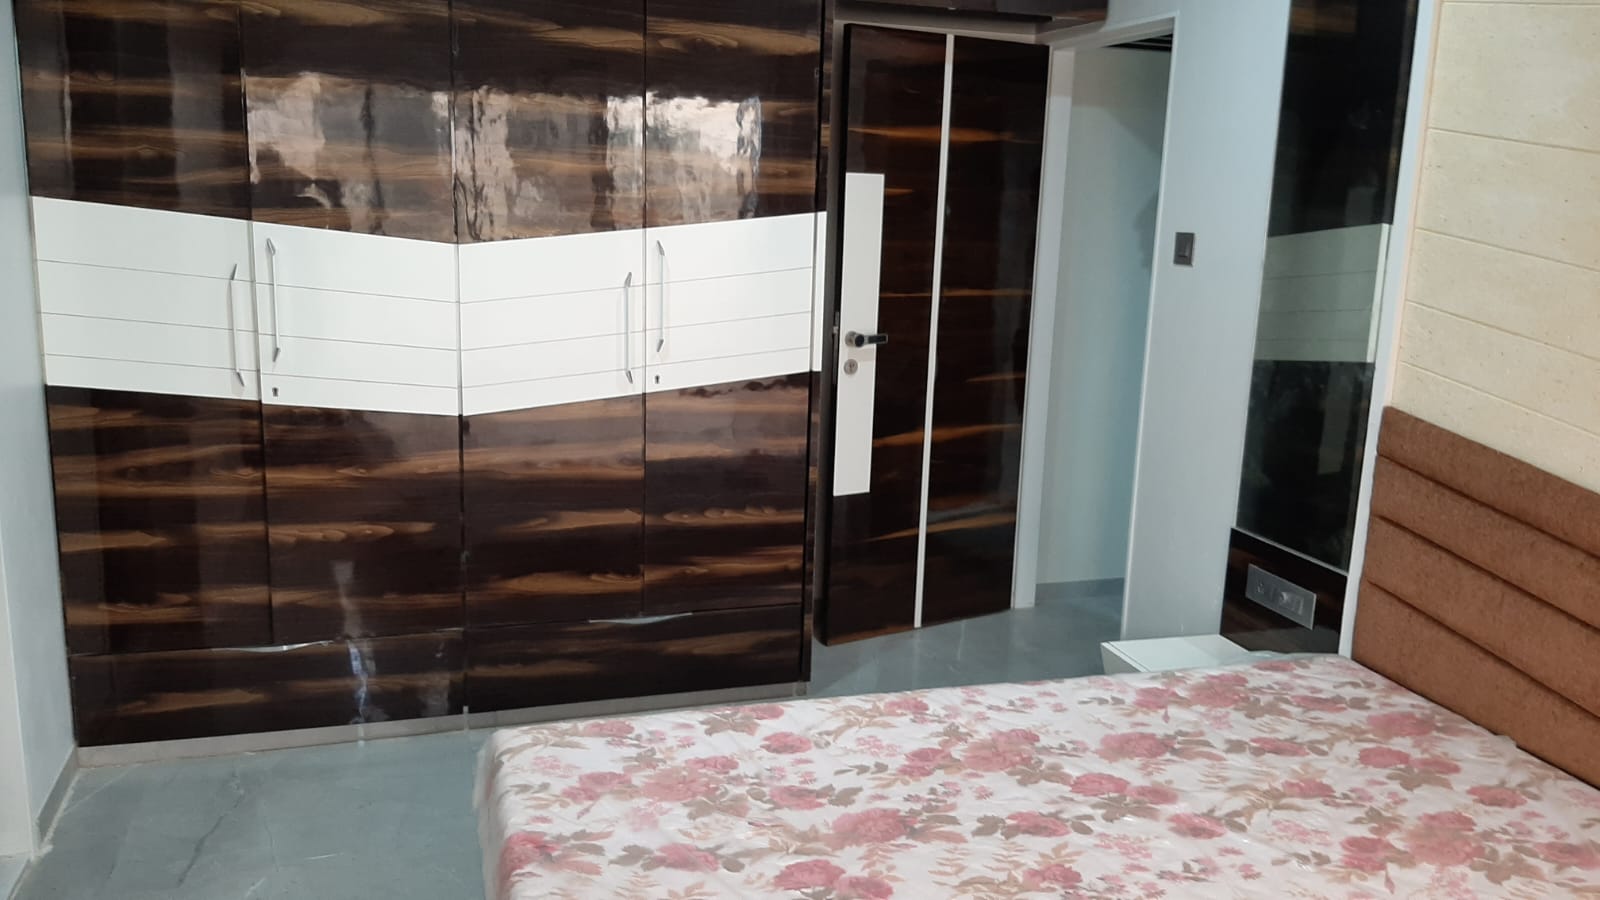 3 bhk flat for sale in malad west - properties in malad west